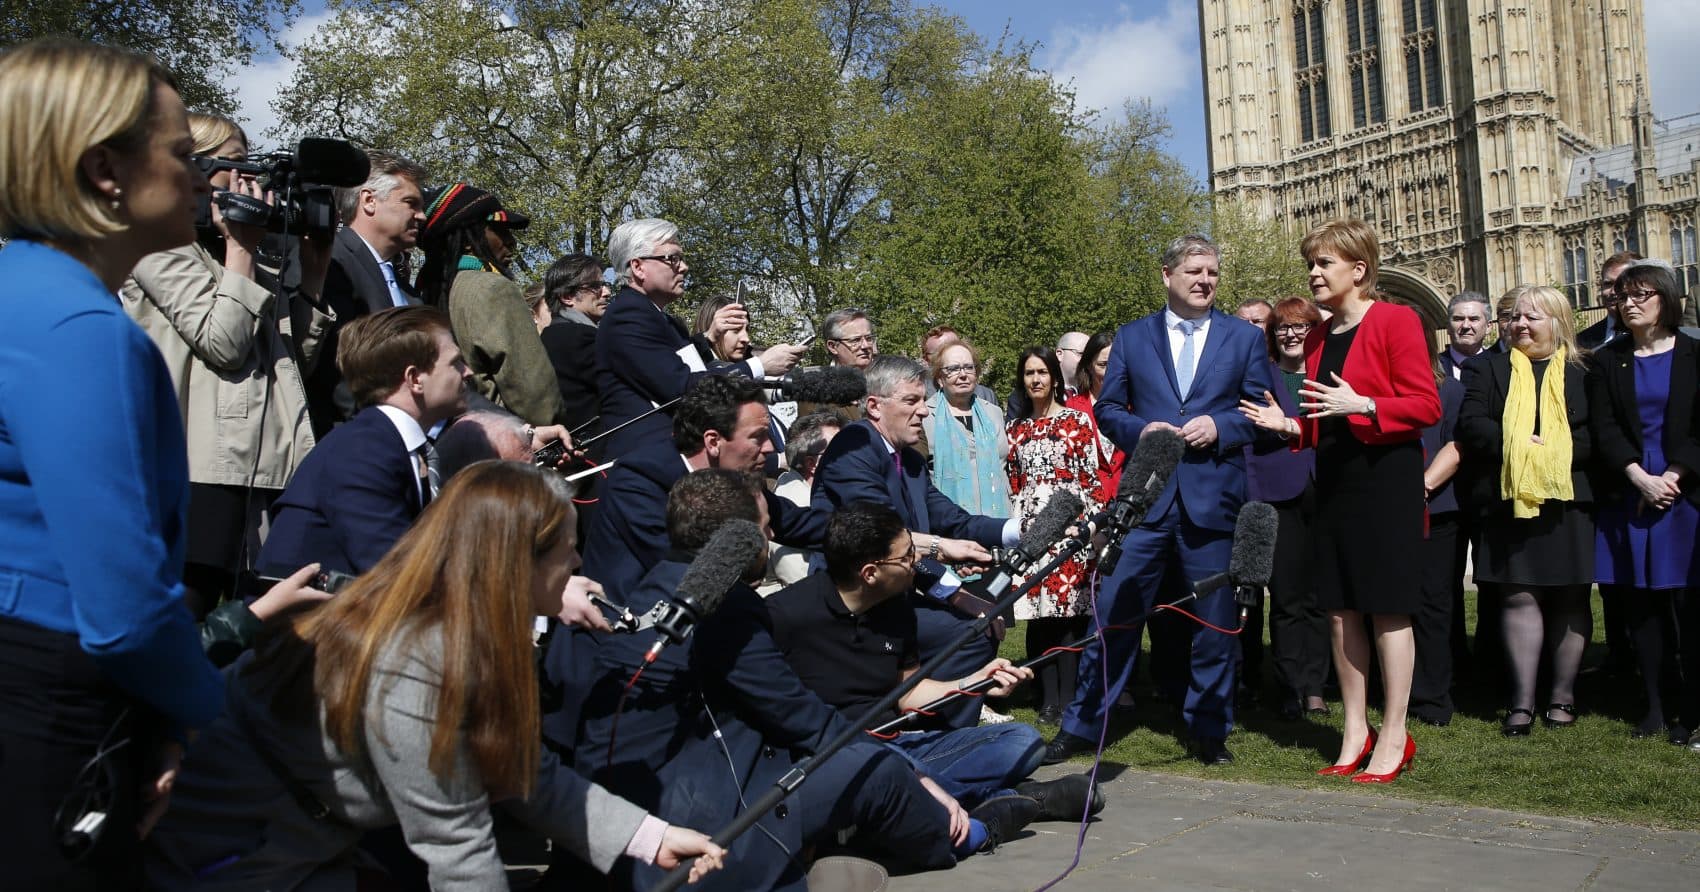 With headstrong leaders on both sides and a long history of conflict, Brexit negotiations promise to be compelling viewing, writes Peter Moloney. Pictured: Scotland's First Minister Nicola Sturgeon, with lawmaker Angus Robertson an SNP member of the UK Parliament, speak to the media outside the Palace of Westminster in London, Wednesday, April 19, 2017. (Alastair Grant/AP)